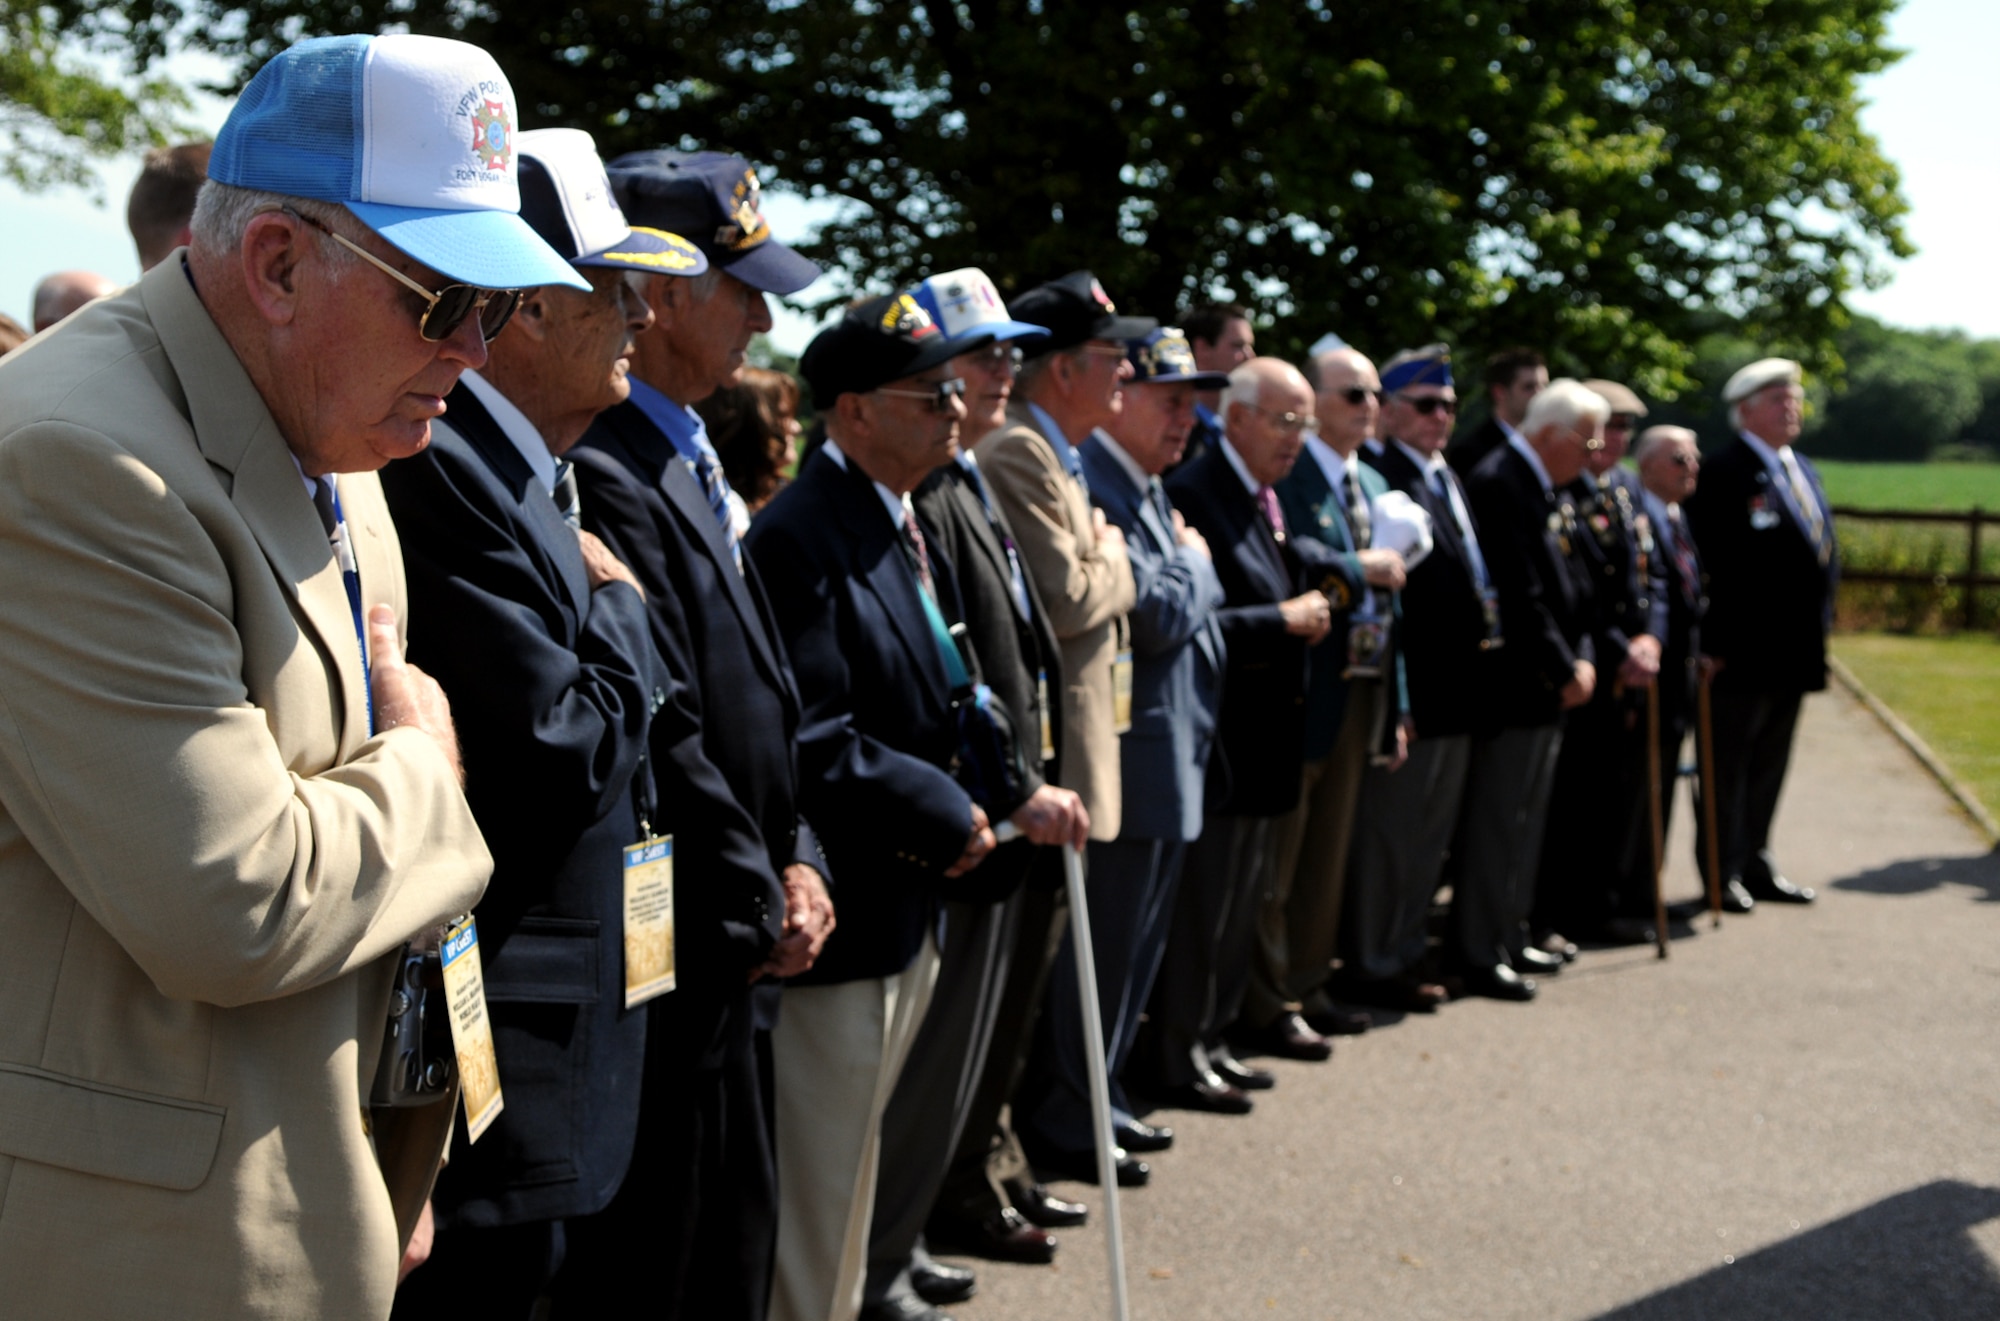 American and British World War II veterans on a tour of significant sites in the European Theater render honors during the singing of the Star Spangled Banner at Thorpe Abbots June 1.  A small ceremony at the airfield included eyewitness accounts of the D-Day invasion, some given by the veterans themselves and some read from interview notes by college students, and the laying of a memorial wreath at the site.   (U.S. Air Force photo by Staff Sgt. Austin M. May)